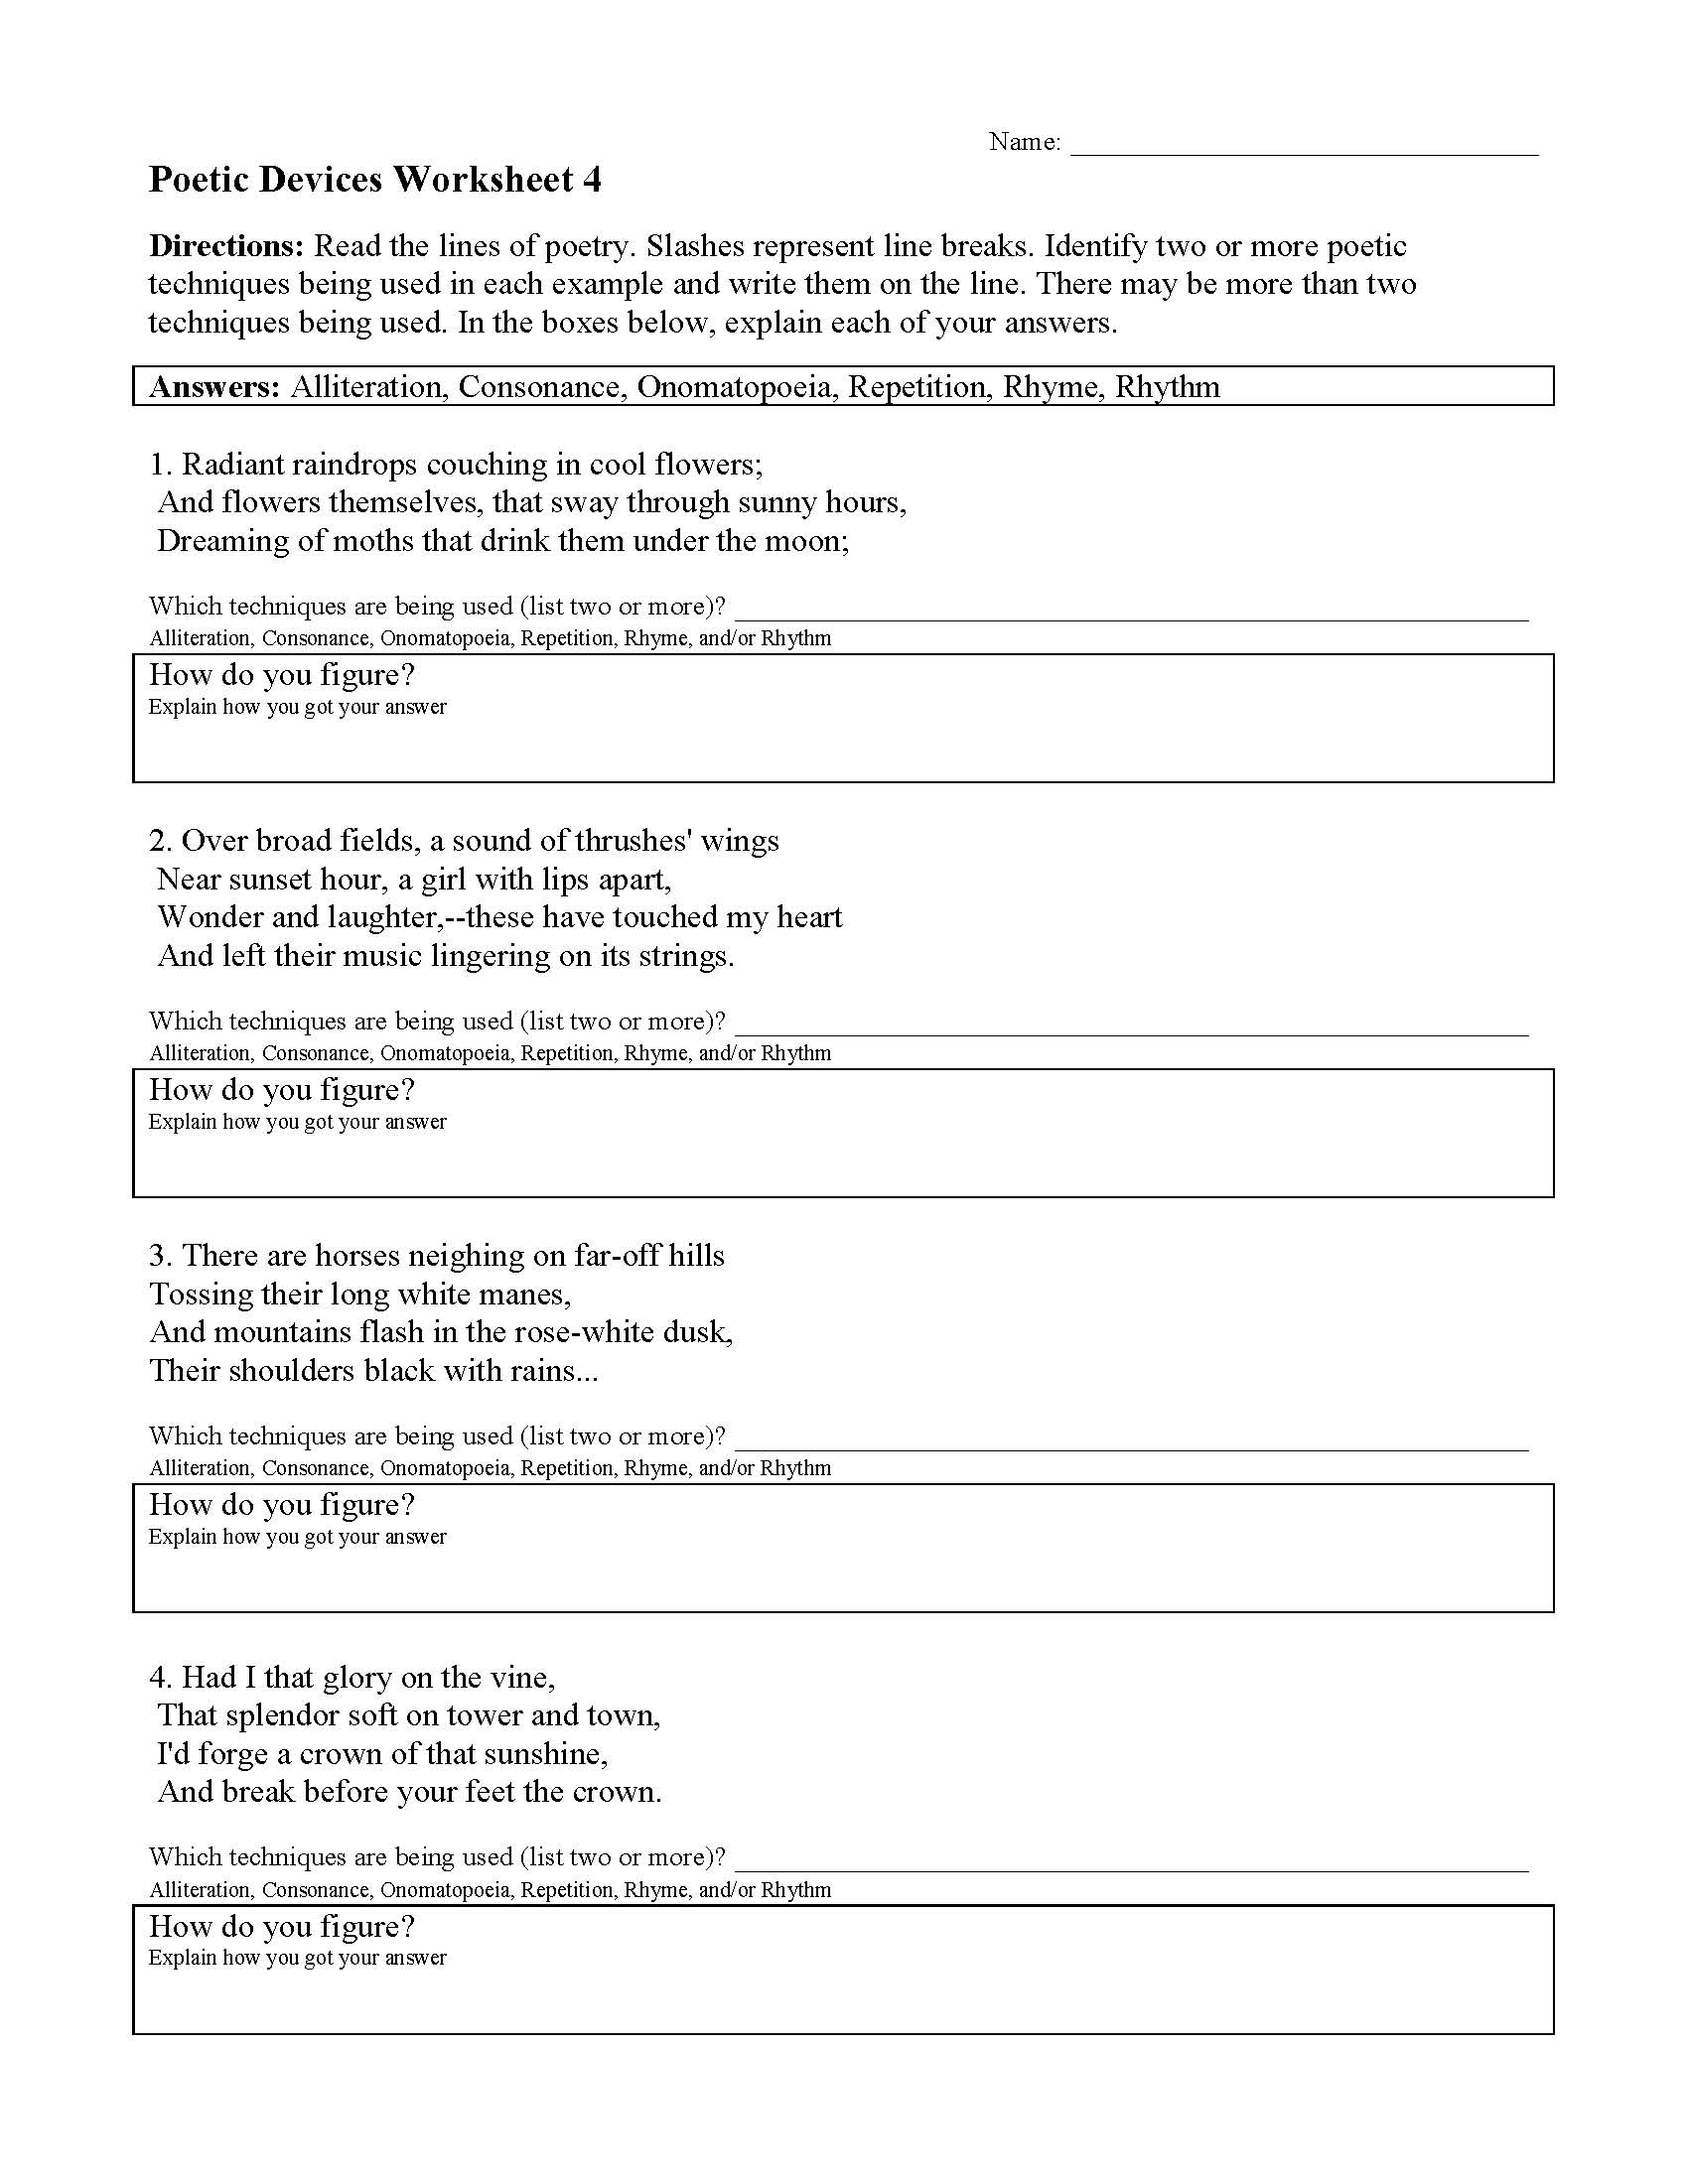 Poetic Devices Worksheet 23  Reading Activity Inside Poetic Devices Worksheet 1